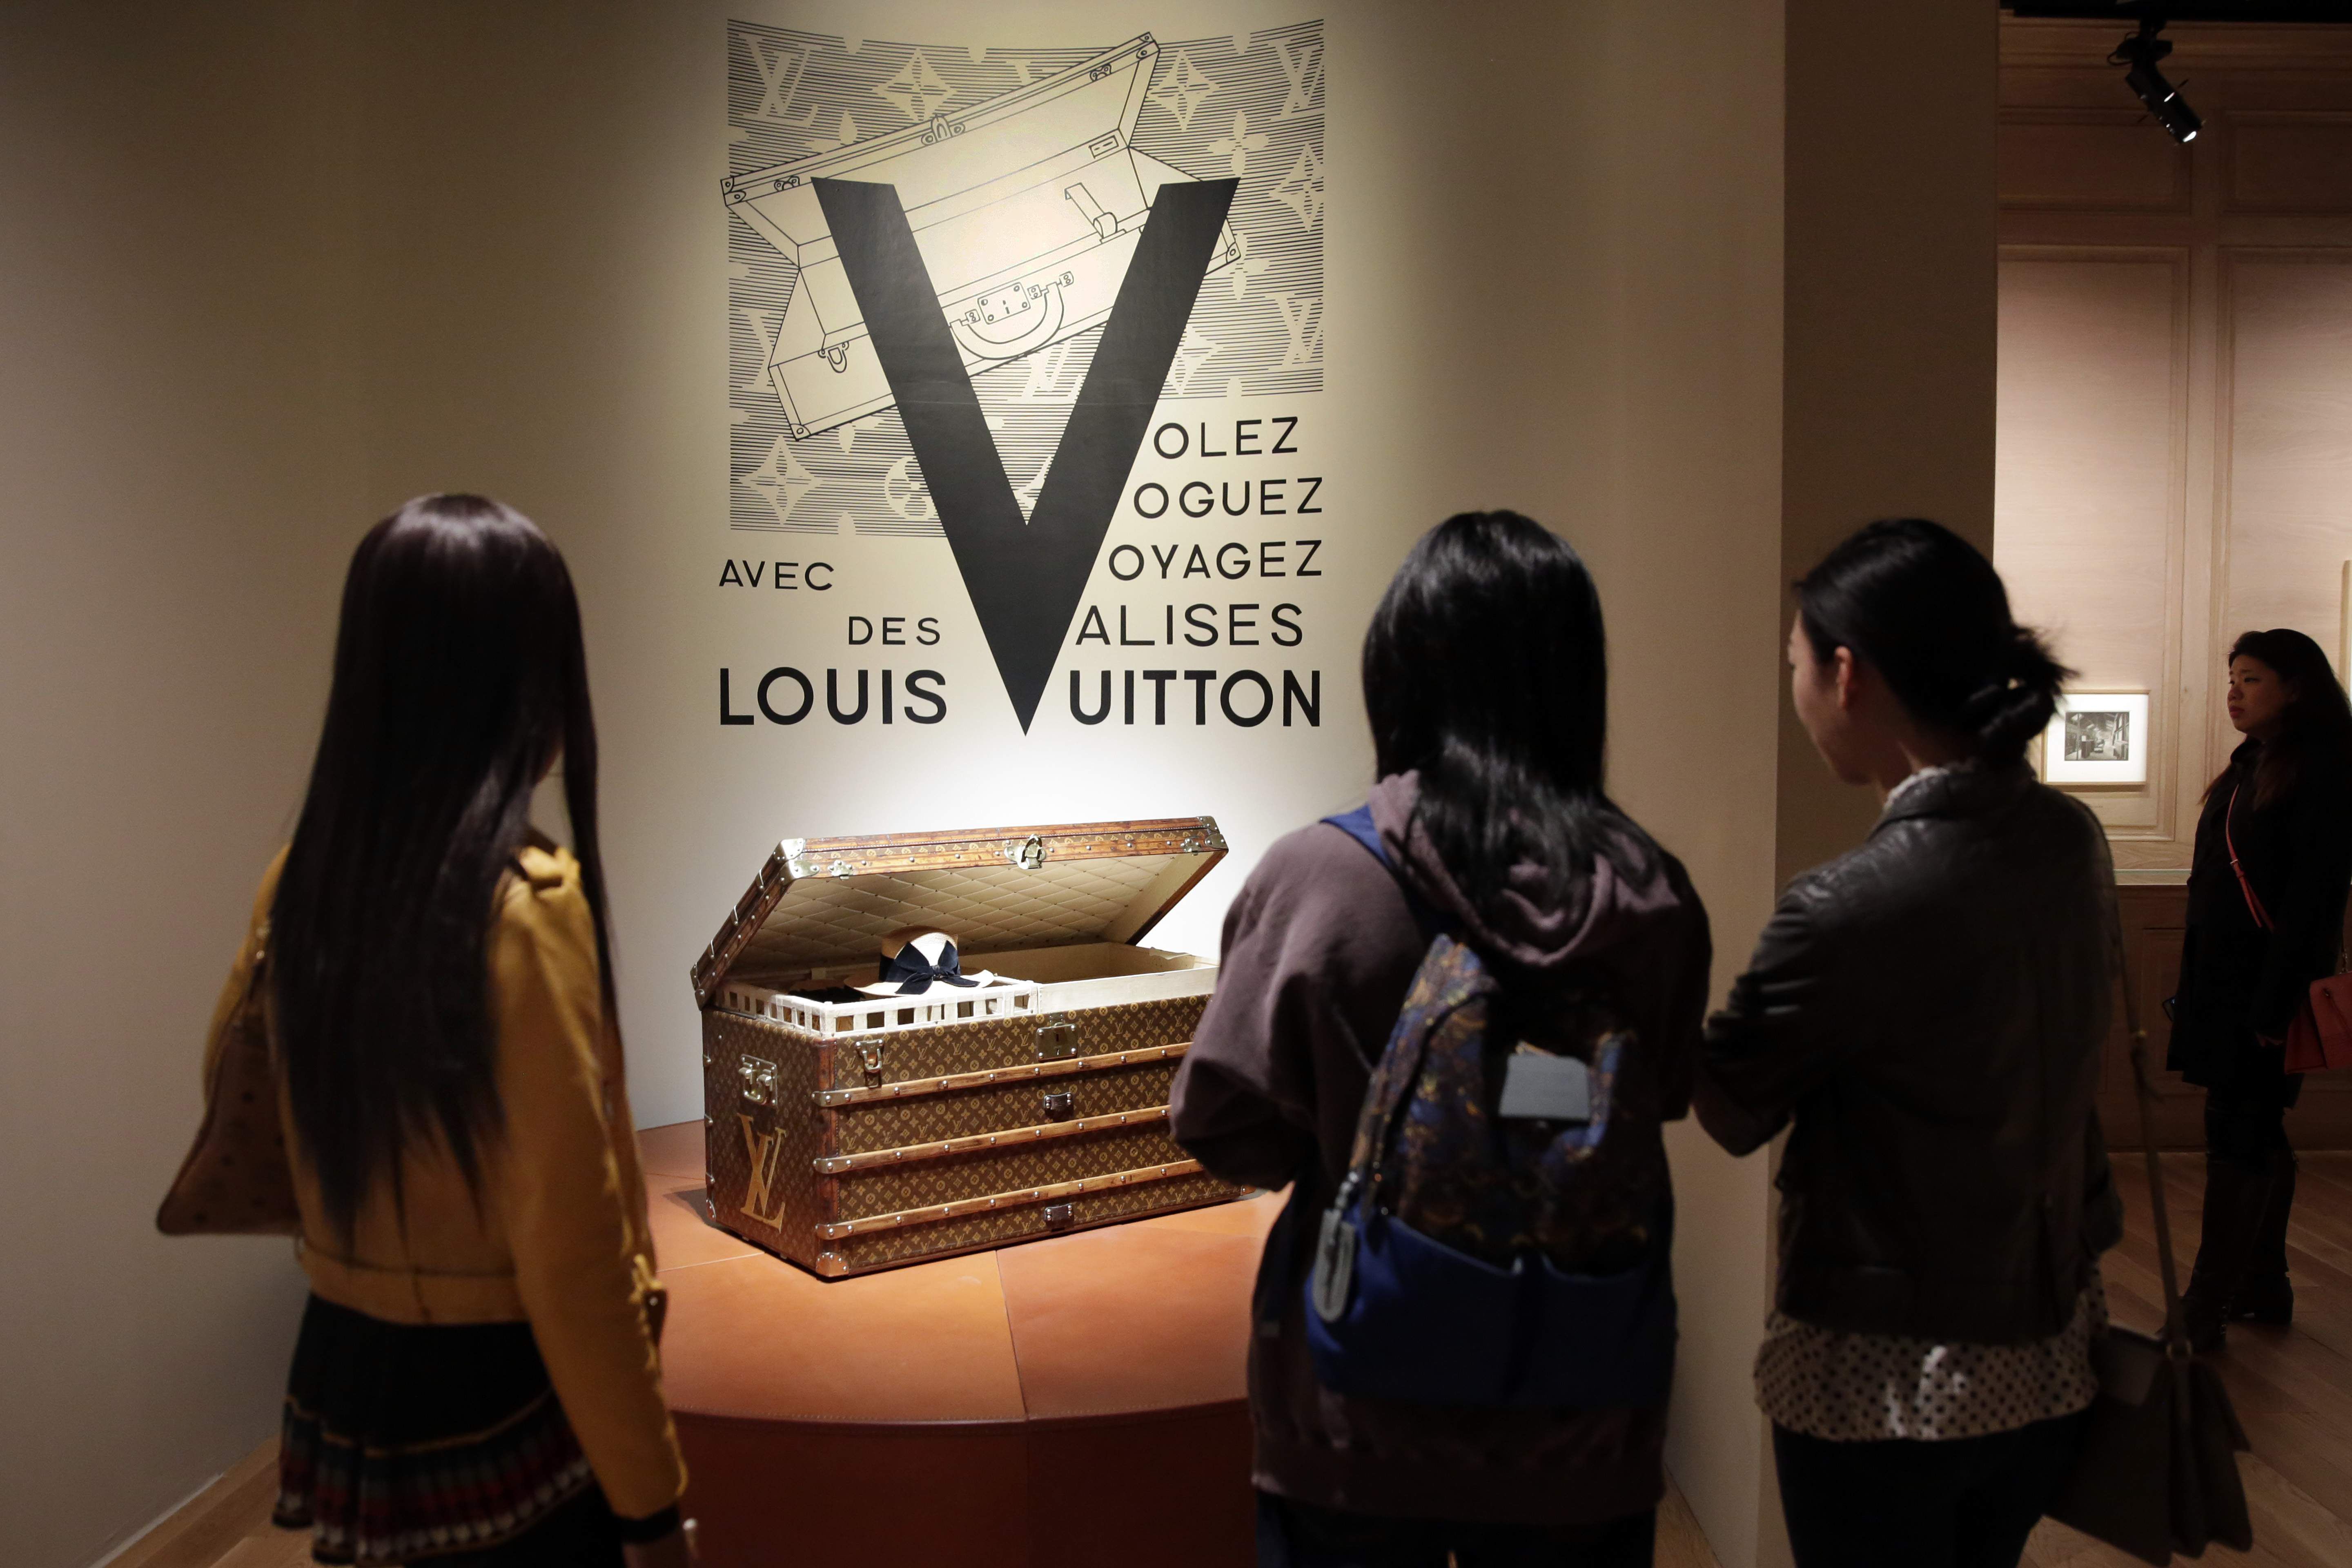 Story of Louis Vuitton: As travel changed, so did luggage